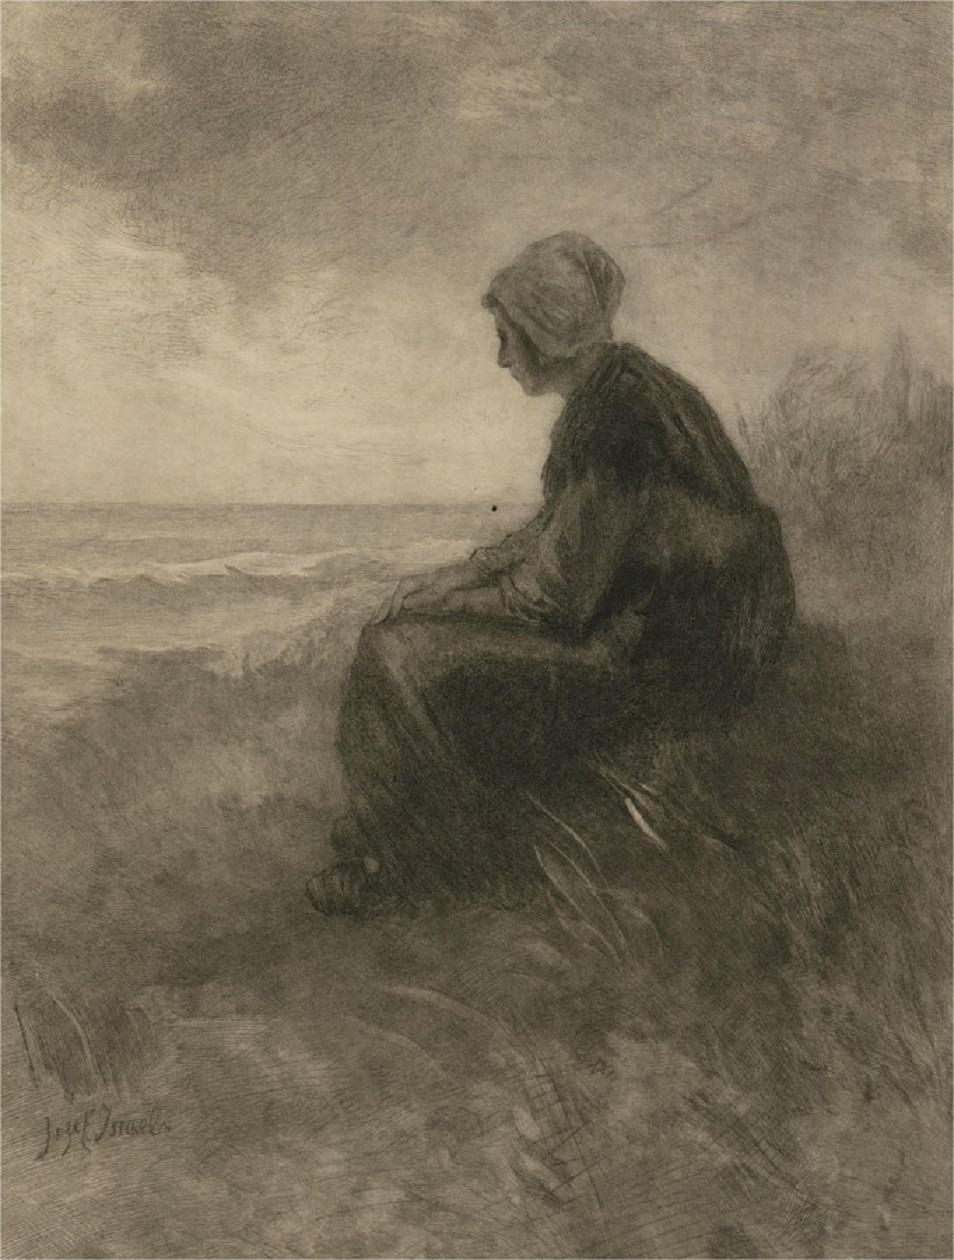 Jozef IsraÃ«ls (1824â€“1911) - Late 19th Century Etching, Lost At Sea 1